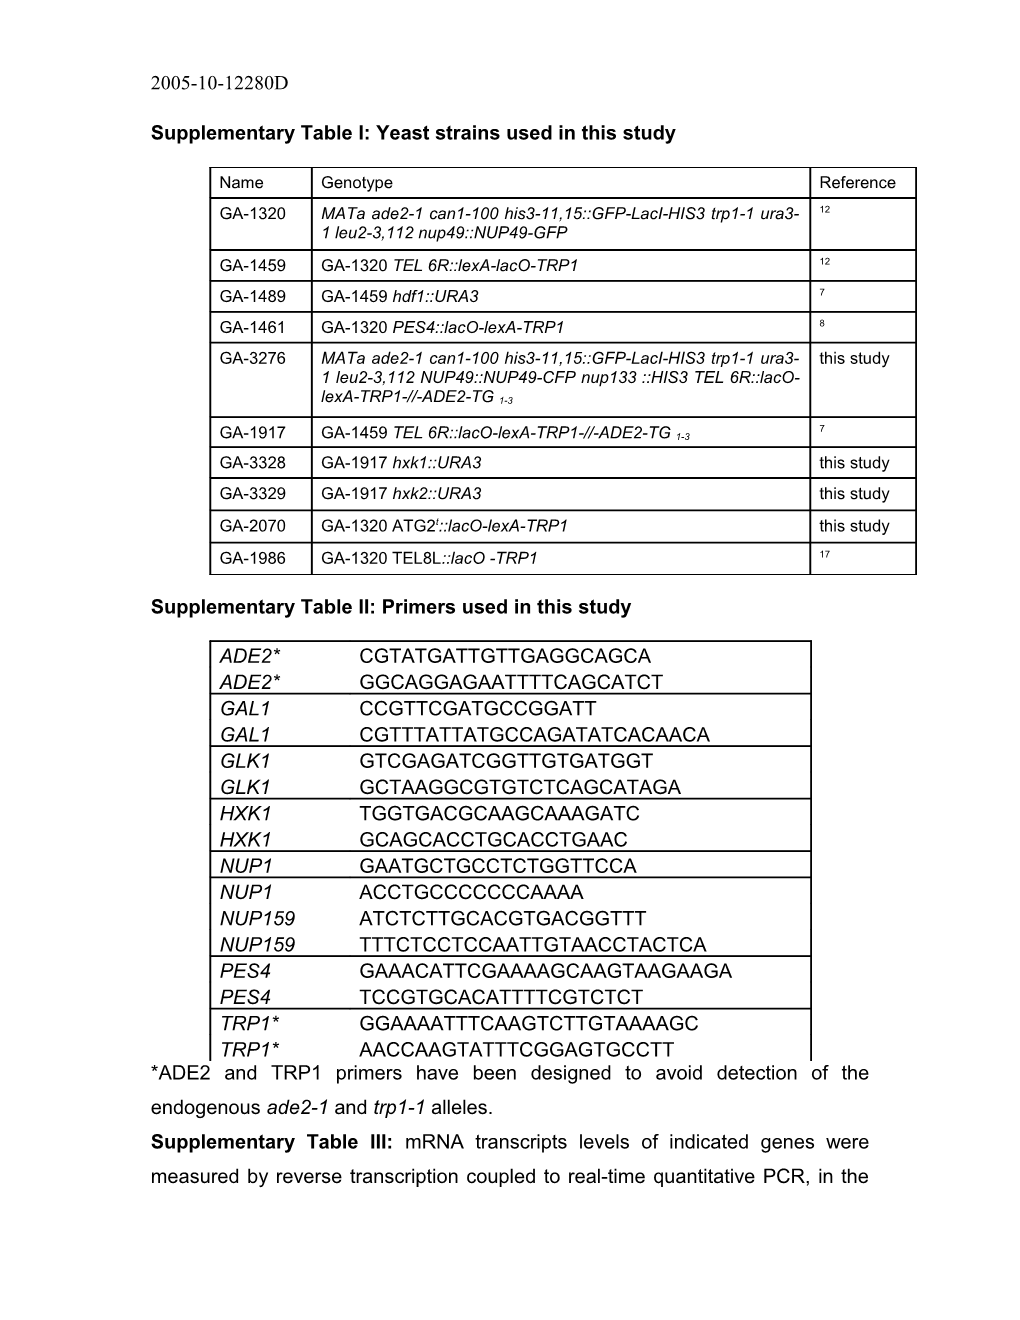 Supplementary Table I: Yeast Strains Used in This Study